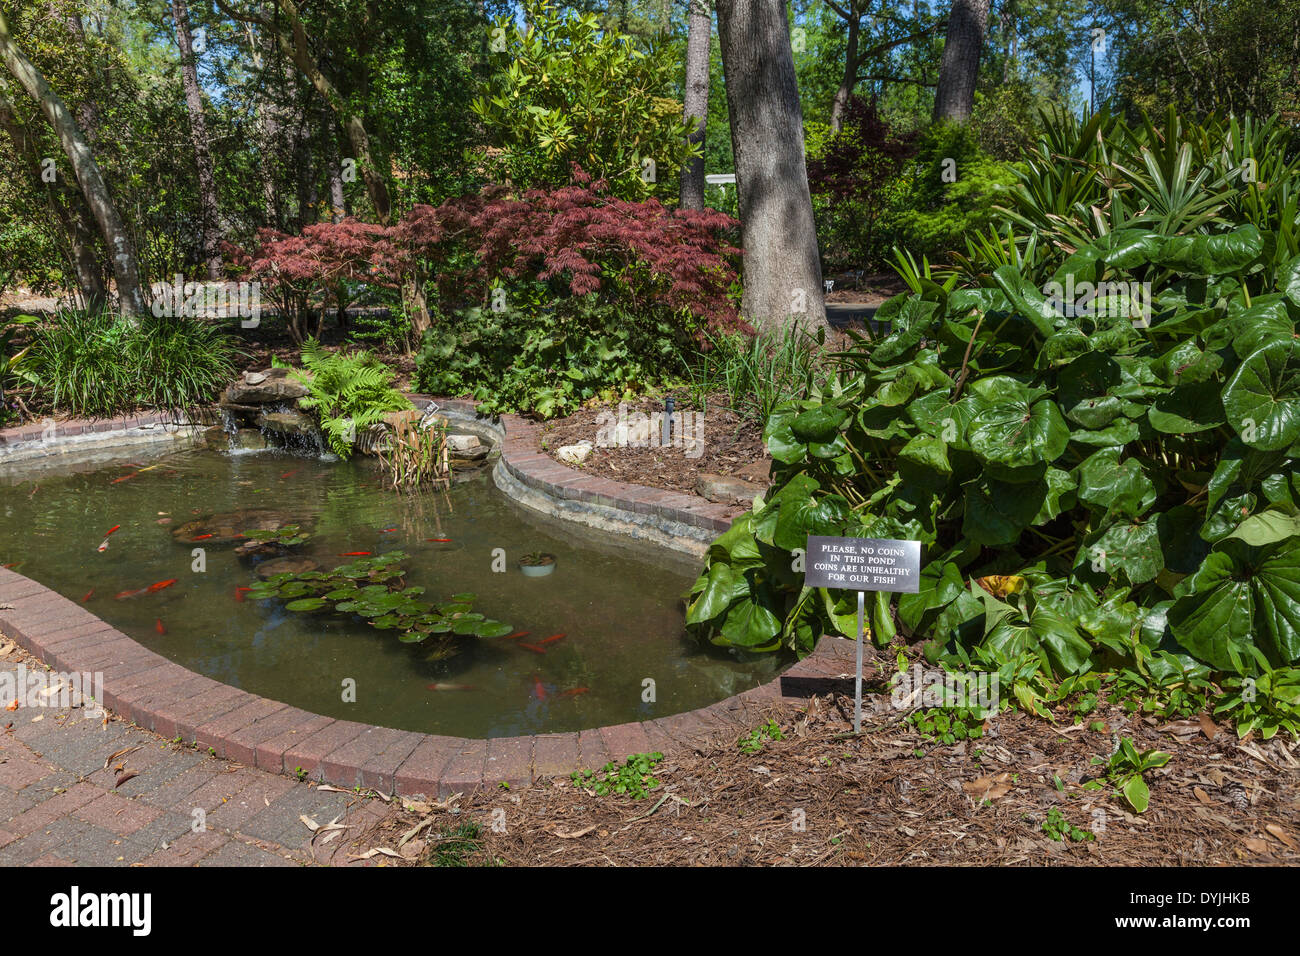 Fish pond with 'no coins' sign at Mercer Botanical Gardens. Stock Photo